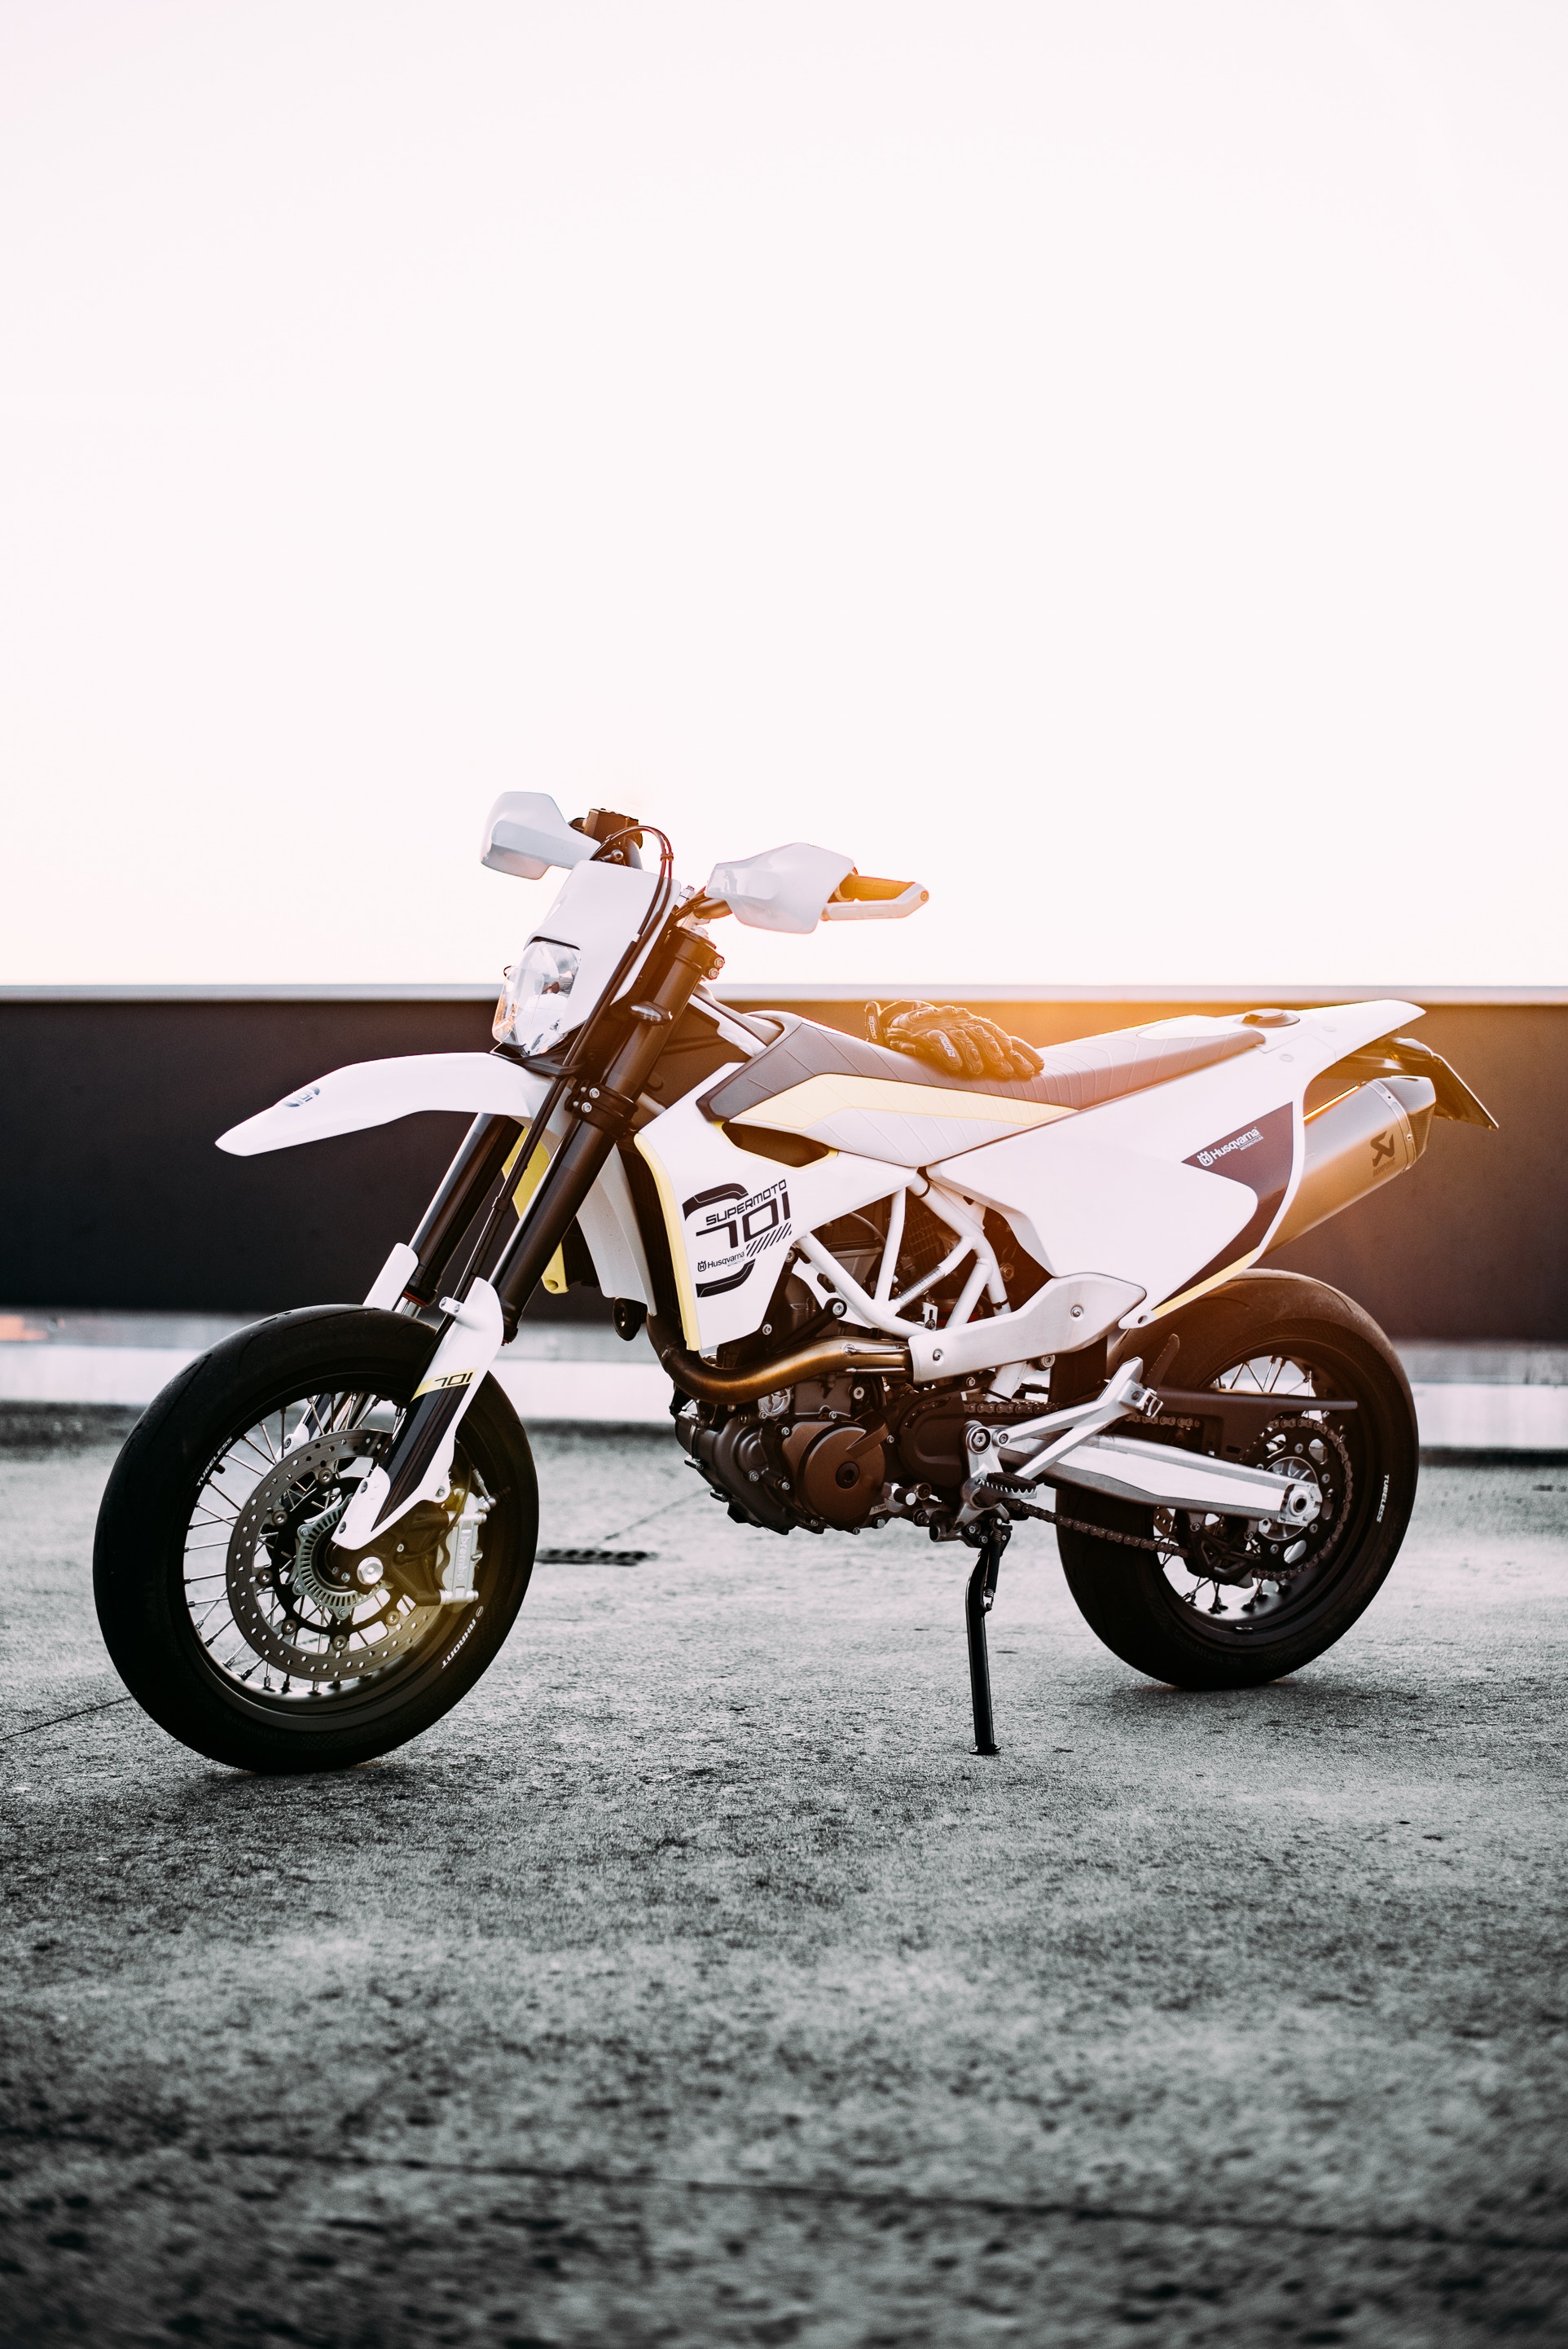 side view, motorcycles, white, motorcycle HD wallpaper